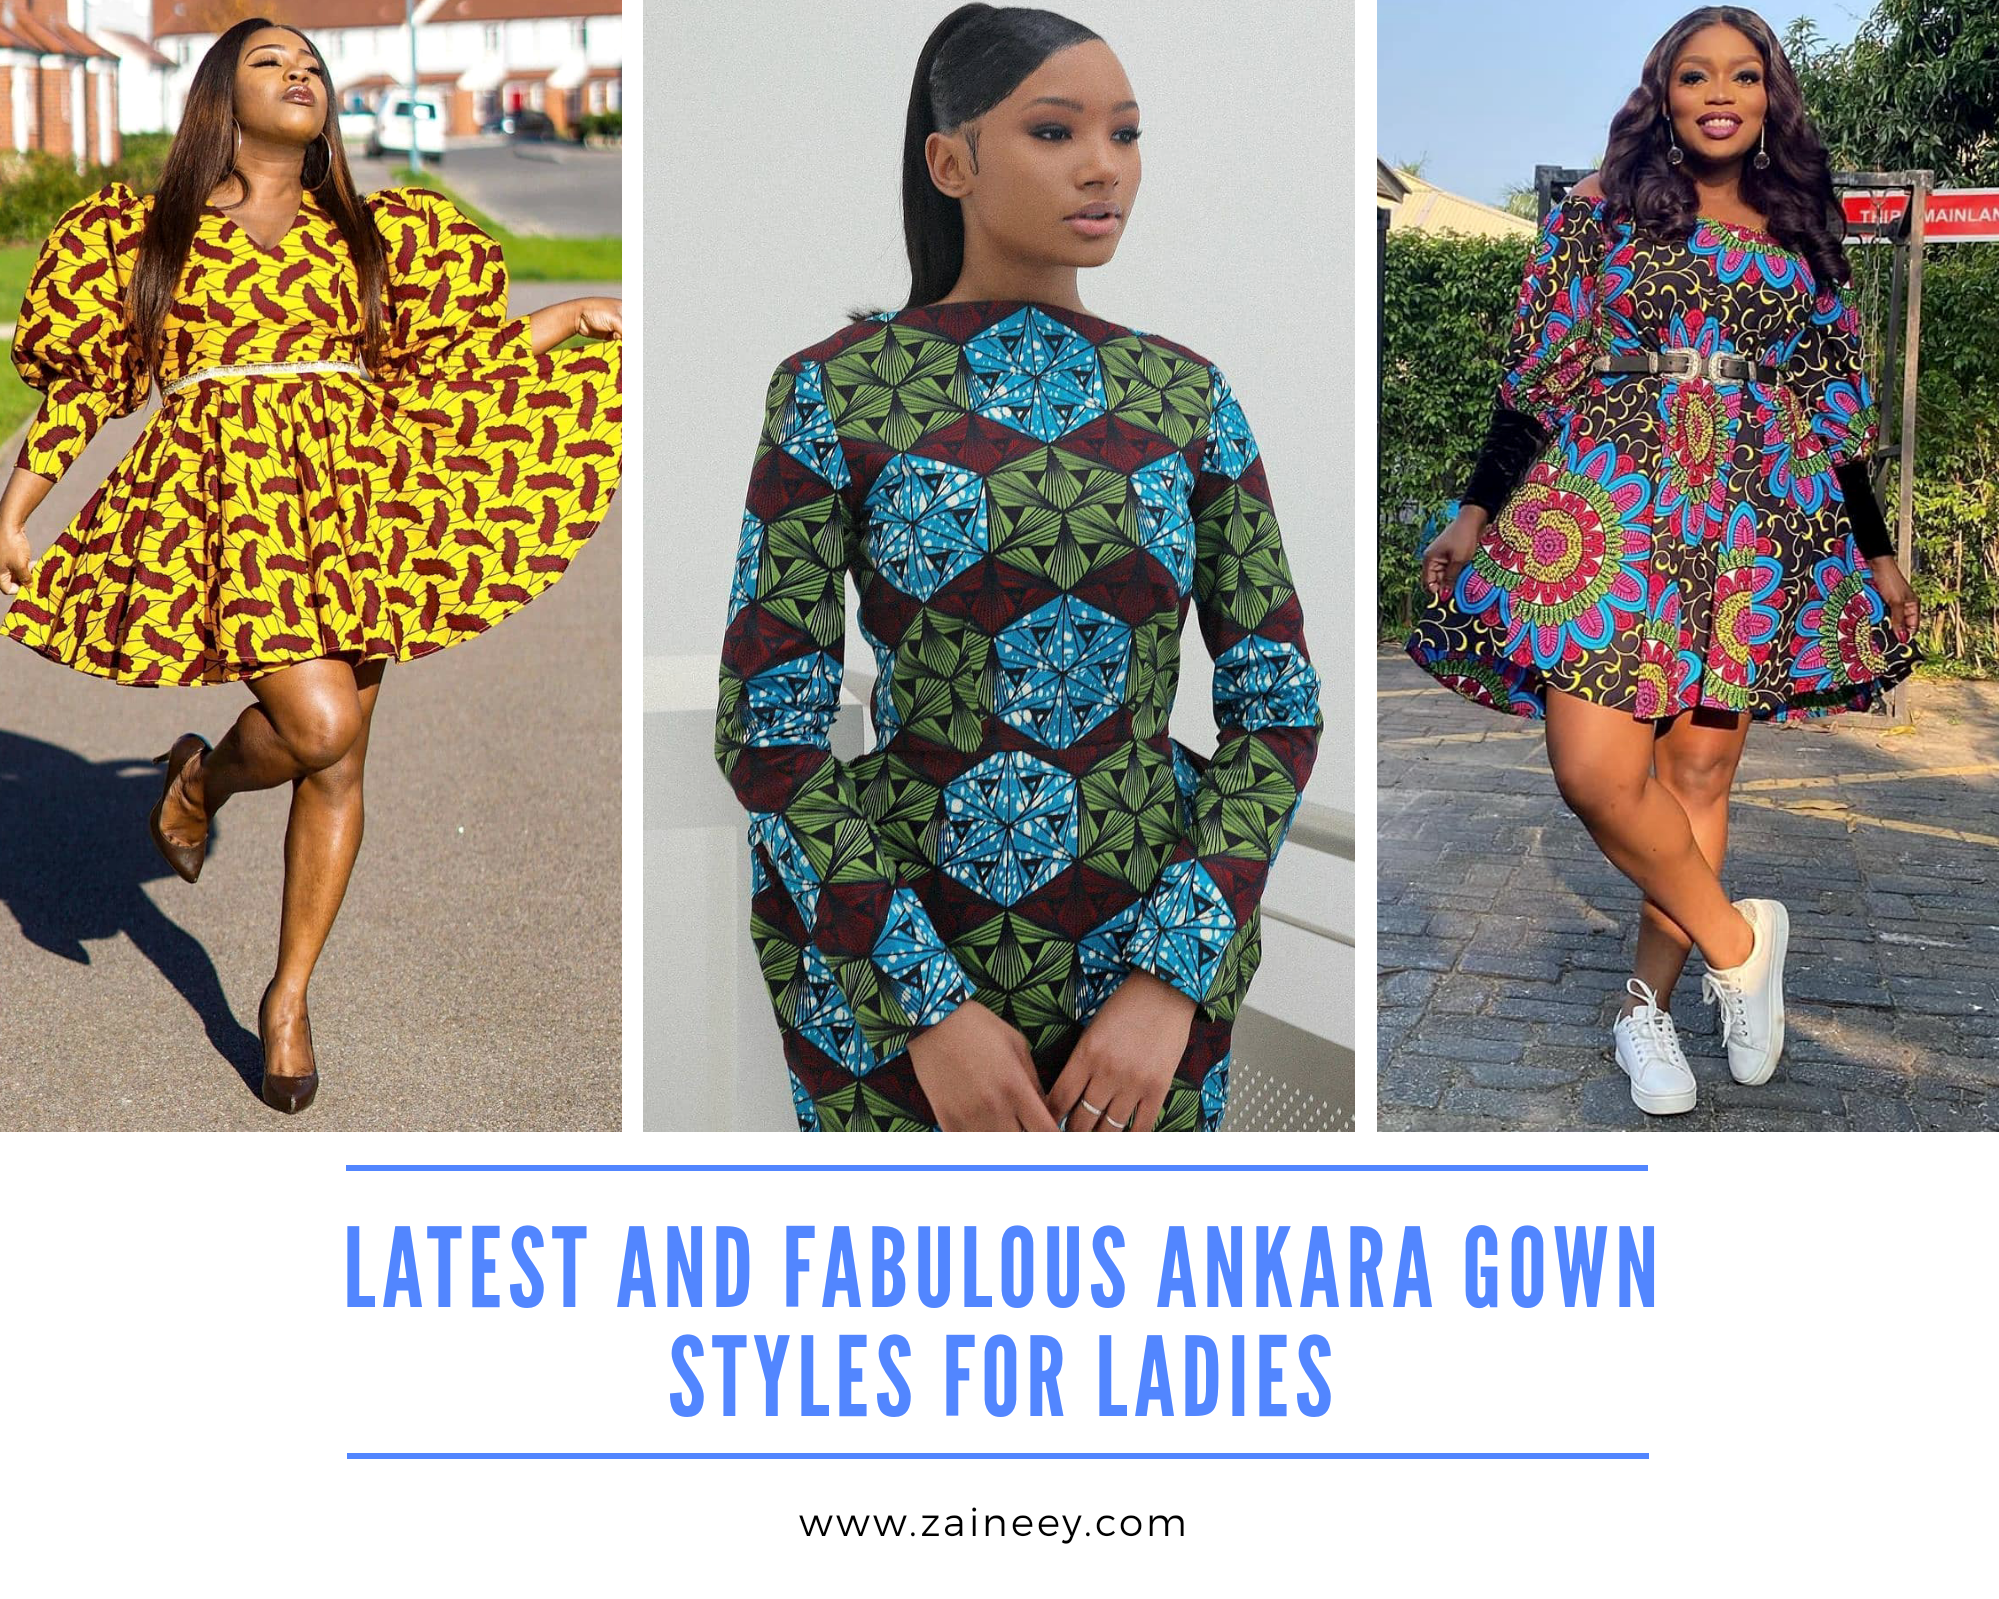 Ankara gowns with bell sleeves 2017 – LATEST ANKARA LONG GOWN STYLES |  African print dress designs – summer print sheath dresses plus size